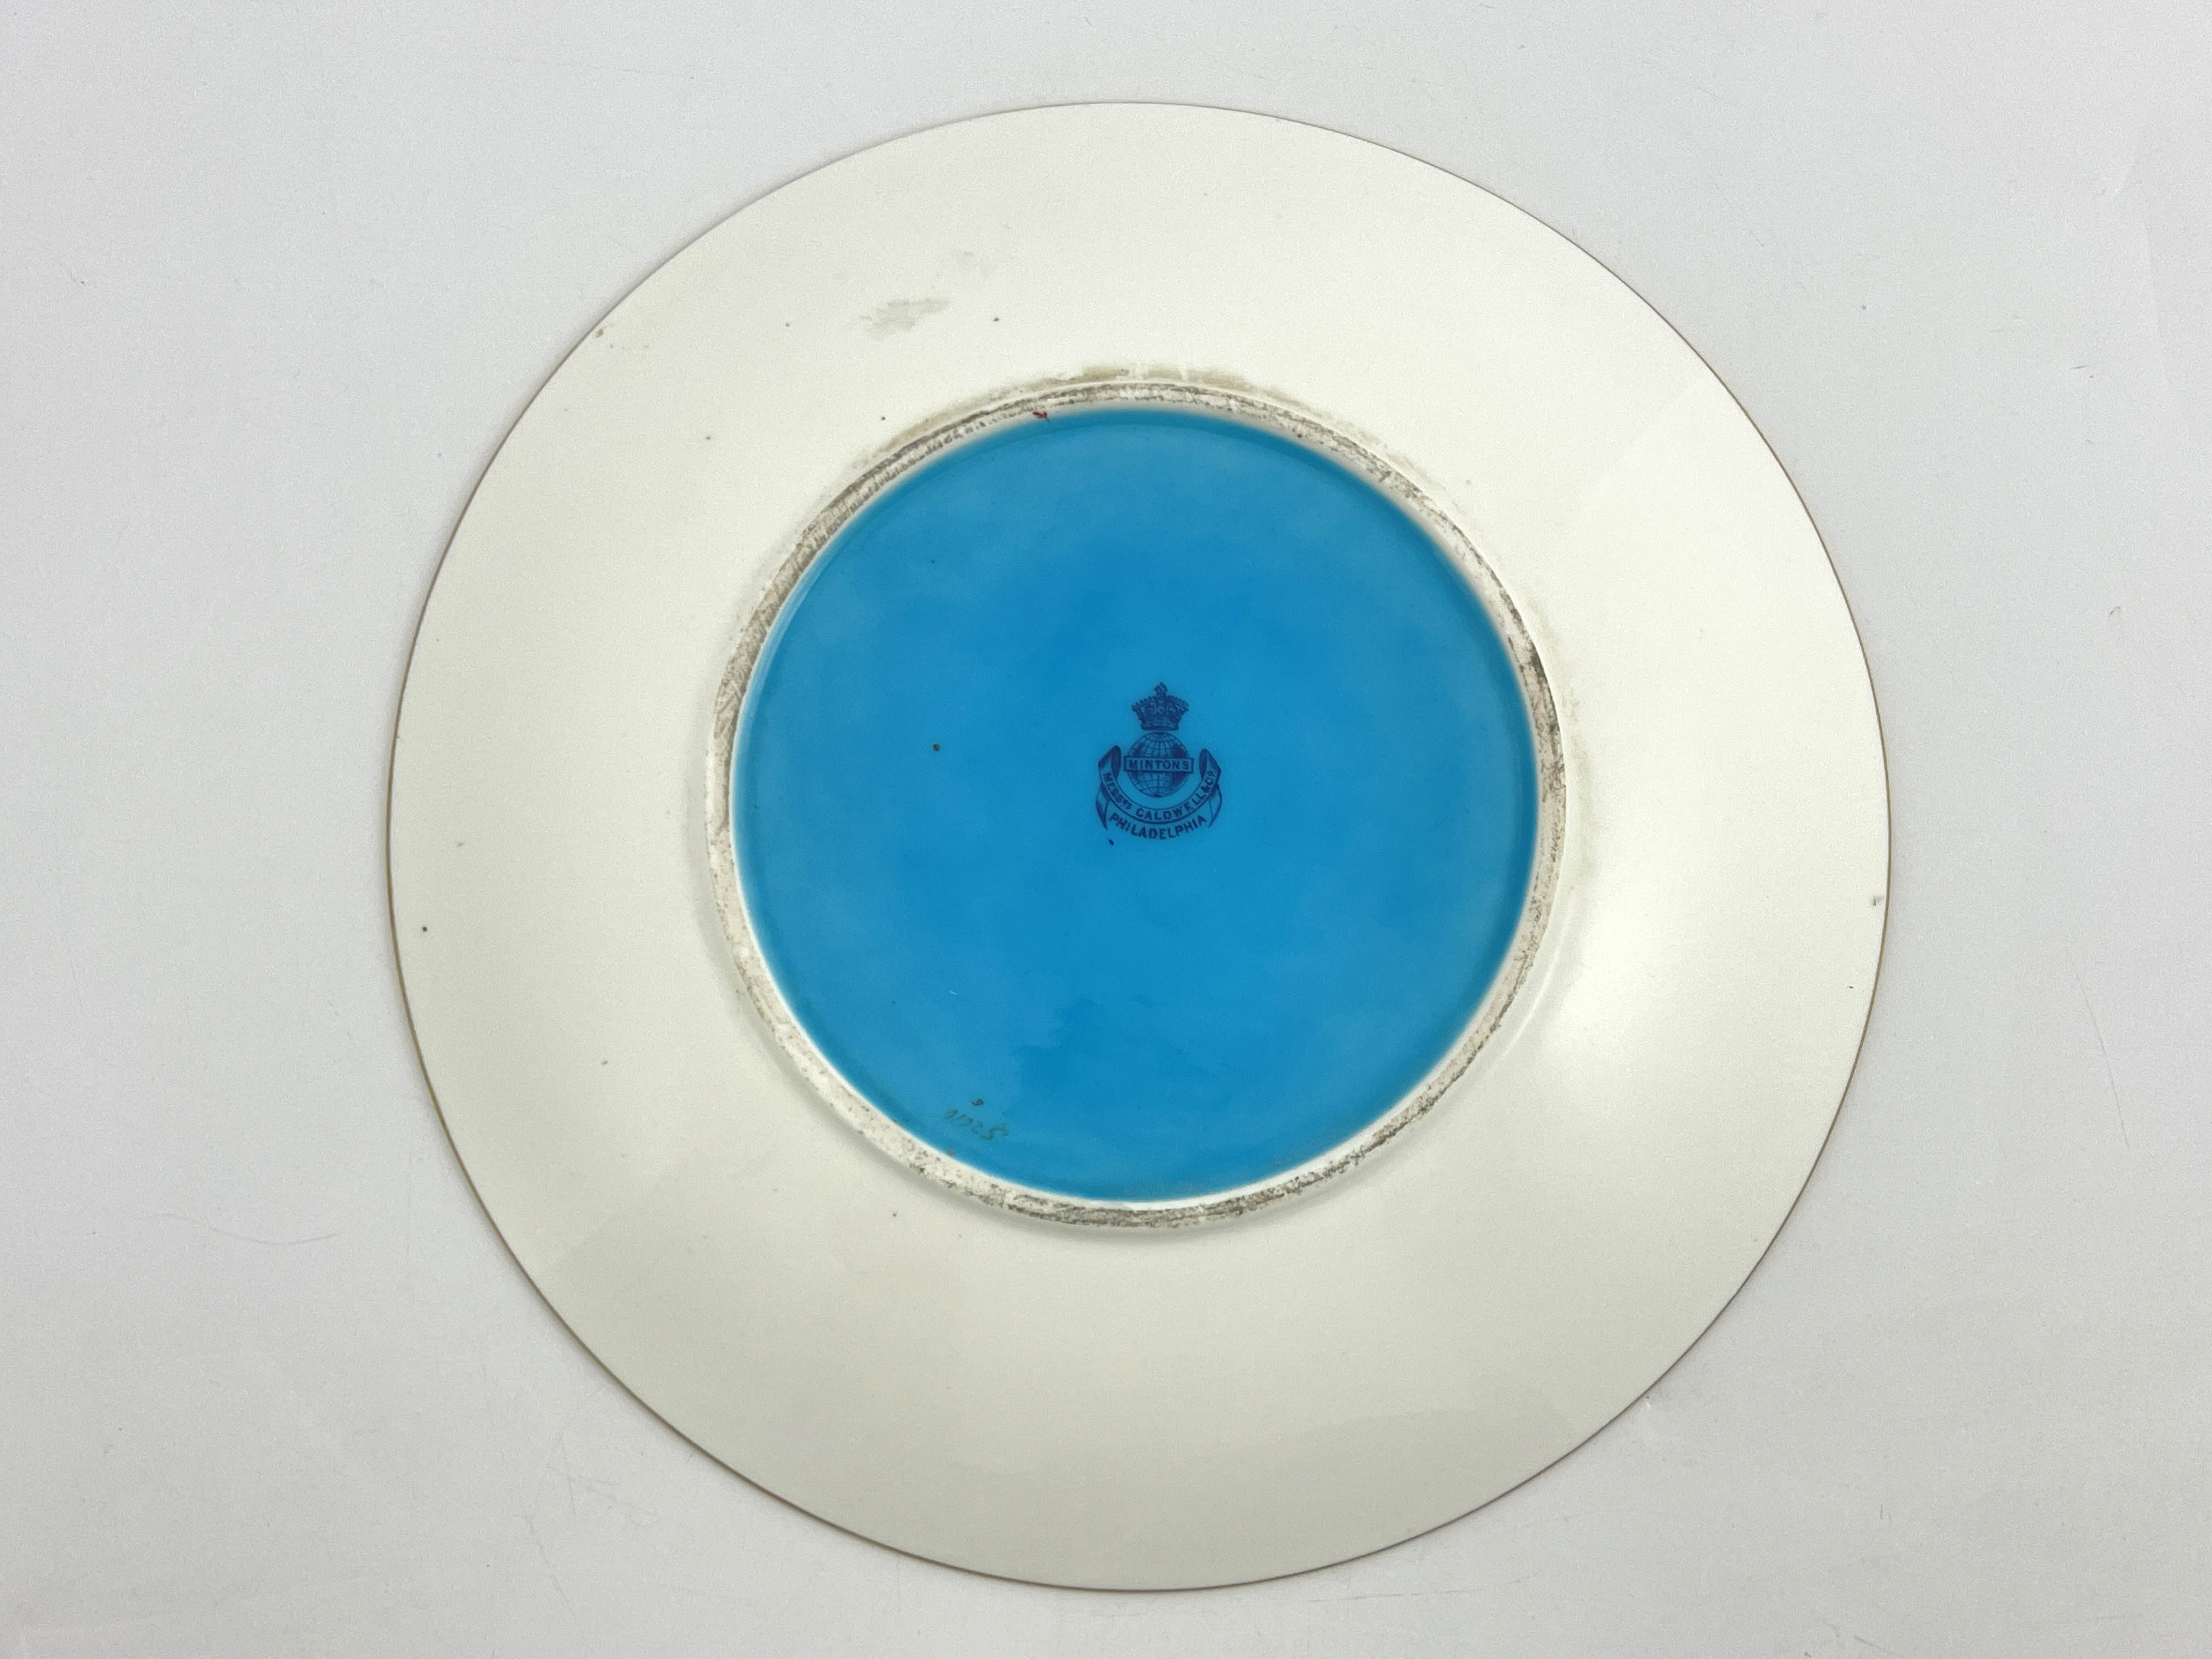 Christopher Dresser for Minton, an Aesthetic Movement plate - Image 3 of 4